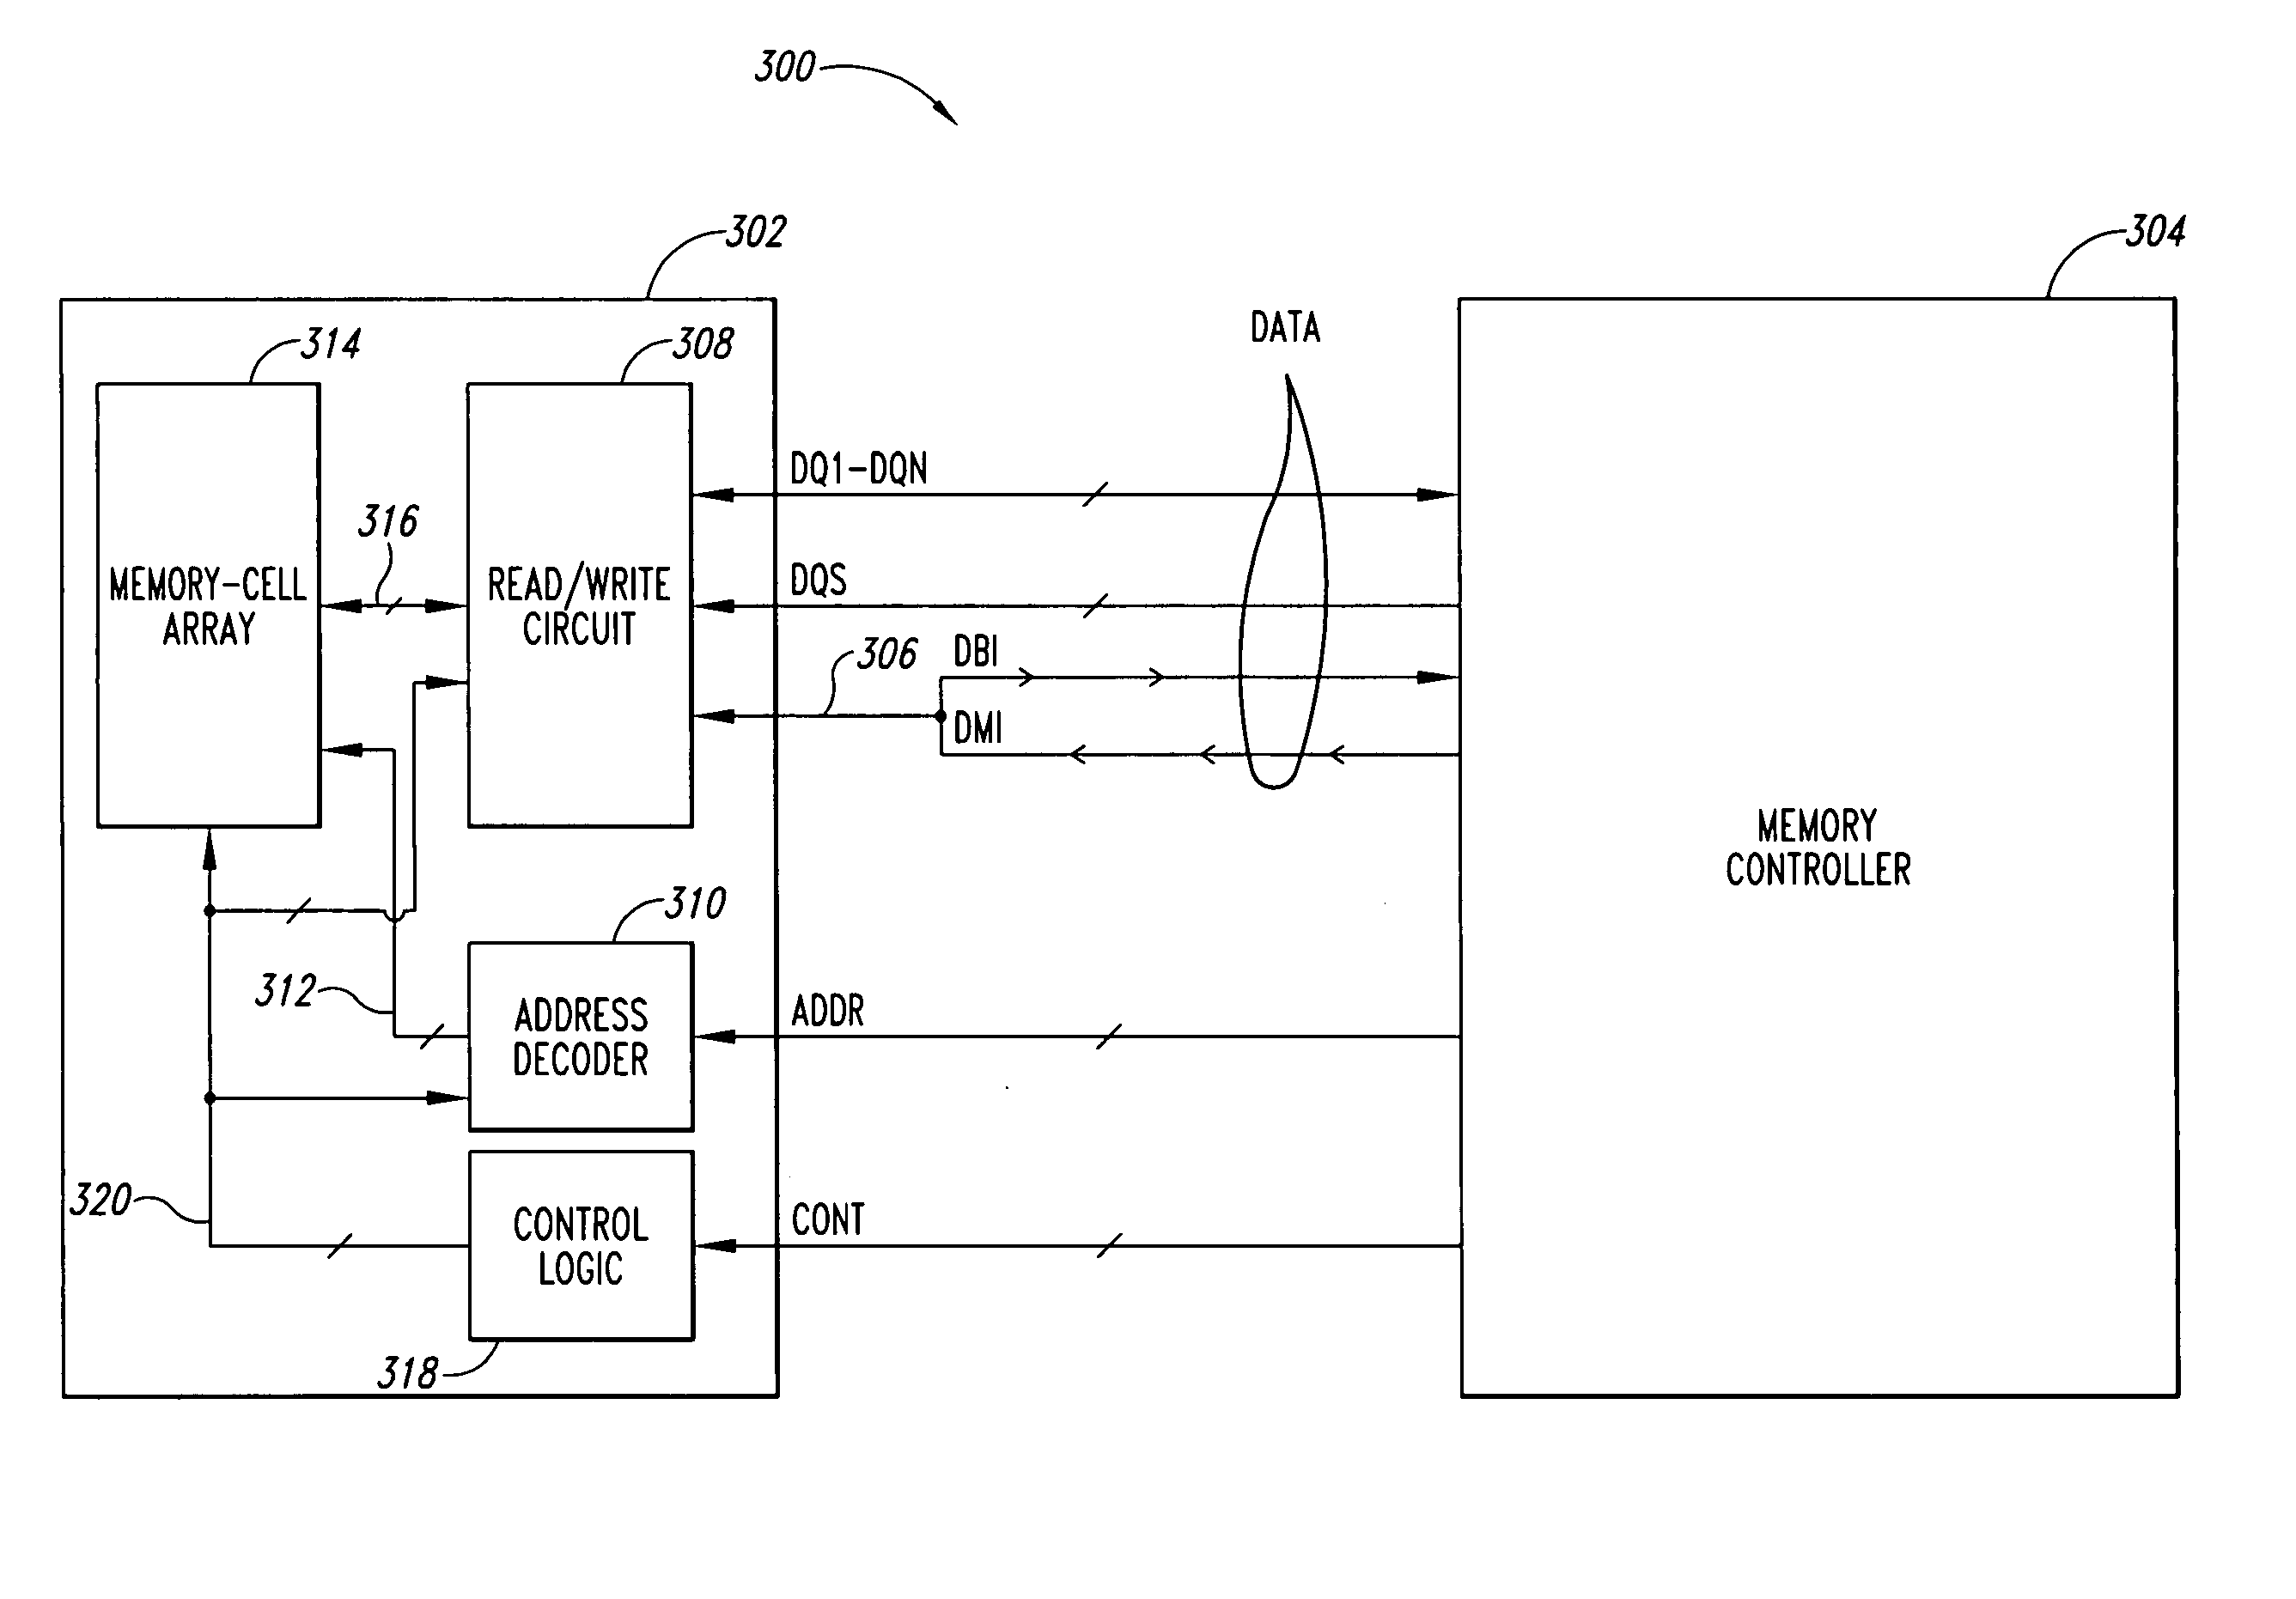 Memory bus polarity indicator system and method for reducing the affects of simultaneous switching outputs (SSO) on memory bus timing